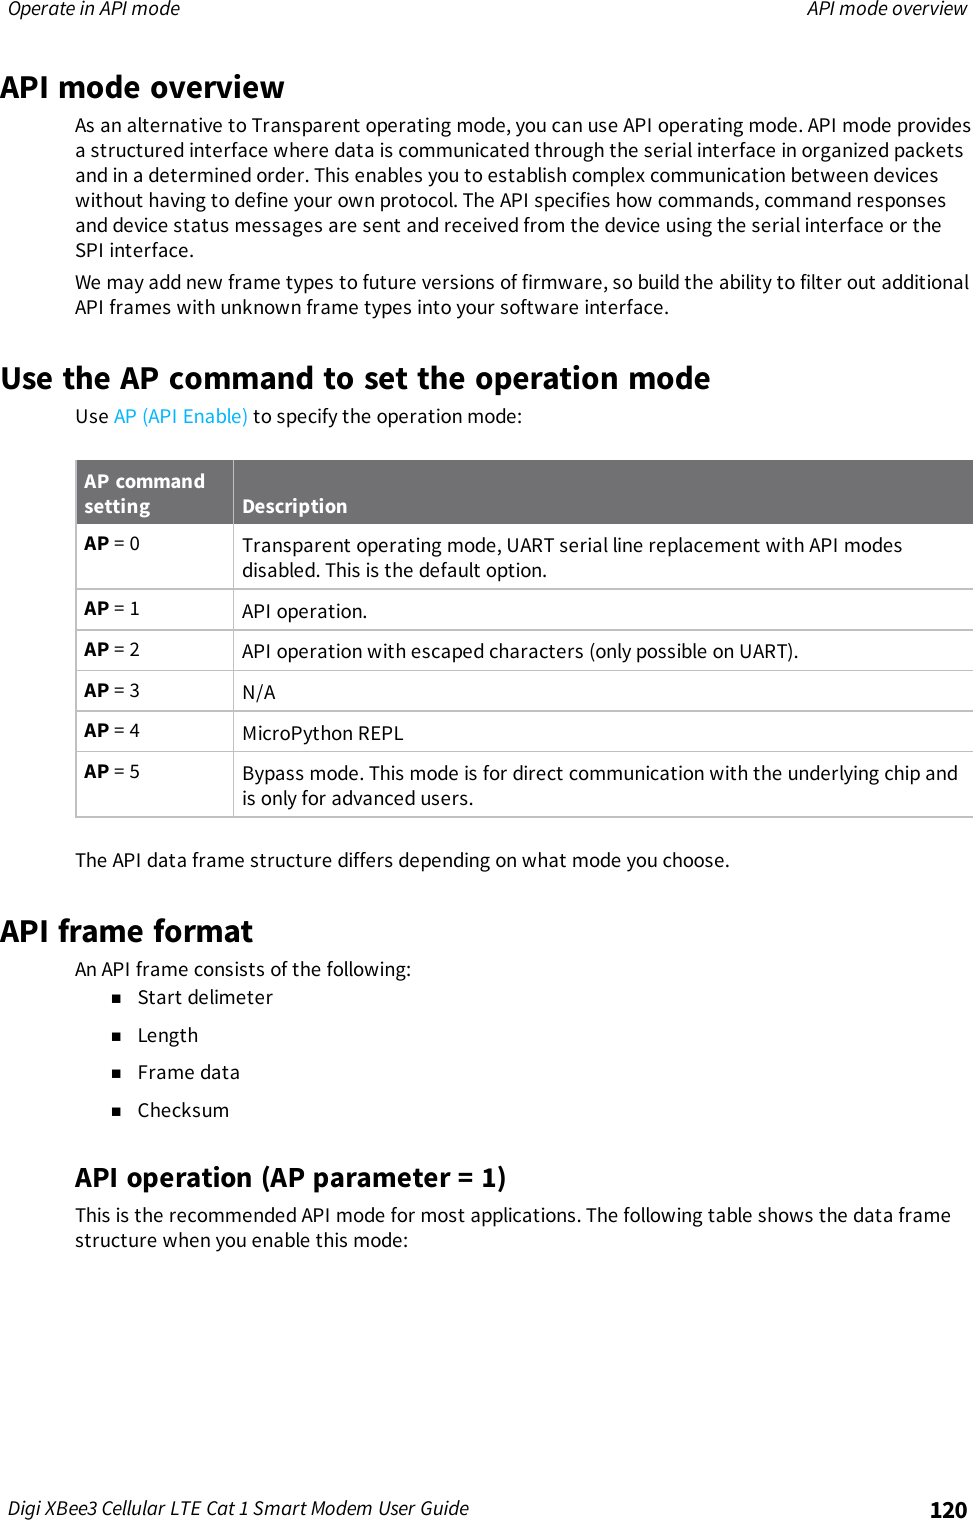 Operate in API mode API mode overviewDigi XBee3 Cellular LTE Cat 1 Smart Modem User Guide 120API mode overviewAs an alternative to Transparent operating mode, you can use API operating mode. API mode providesa structured interface where data is communicated through the serial interface in organized packetsand in a determined order. This enables you to establish complex communication between deviceswithout having to define your own protocol. The API specifies how commands, command responsesand device status messages are sent and received from the device using the serial interface or theSPIinterface.We may add new frame types to future versions of firmware, so build the ability to filter out additionalAPI frames with unknown frame types into your software interface.Use the AP command to set the operation modeUse AP (API Enable) to specify the operation mode:AP commandsetting DescriptionAP = 0 Transparent operating mode, UARTserial line replacement with API modesdisabled. This is the default option.AP = 1 API operation.AP = 2 API operation with escaped characters (only possible on UART).AP = 3 N/AAP = 4 MicroPython REPLAP = 5 Bypass mode. This mode is for direct communication with the underlying chip andis only for advanced users.The API data frame structure differs depending on what mode you choose.API frame formatAn API frame consists of the following:nStart delimeternLengthnFrame datanChecksumAPI operation (AP parameter = 1)This is the recommended API mode for most applications. The following table shows the data framestructure when you enable this mode: